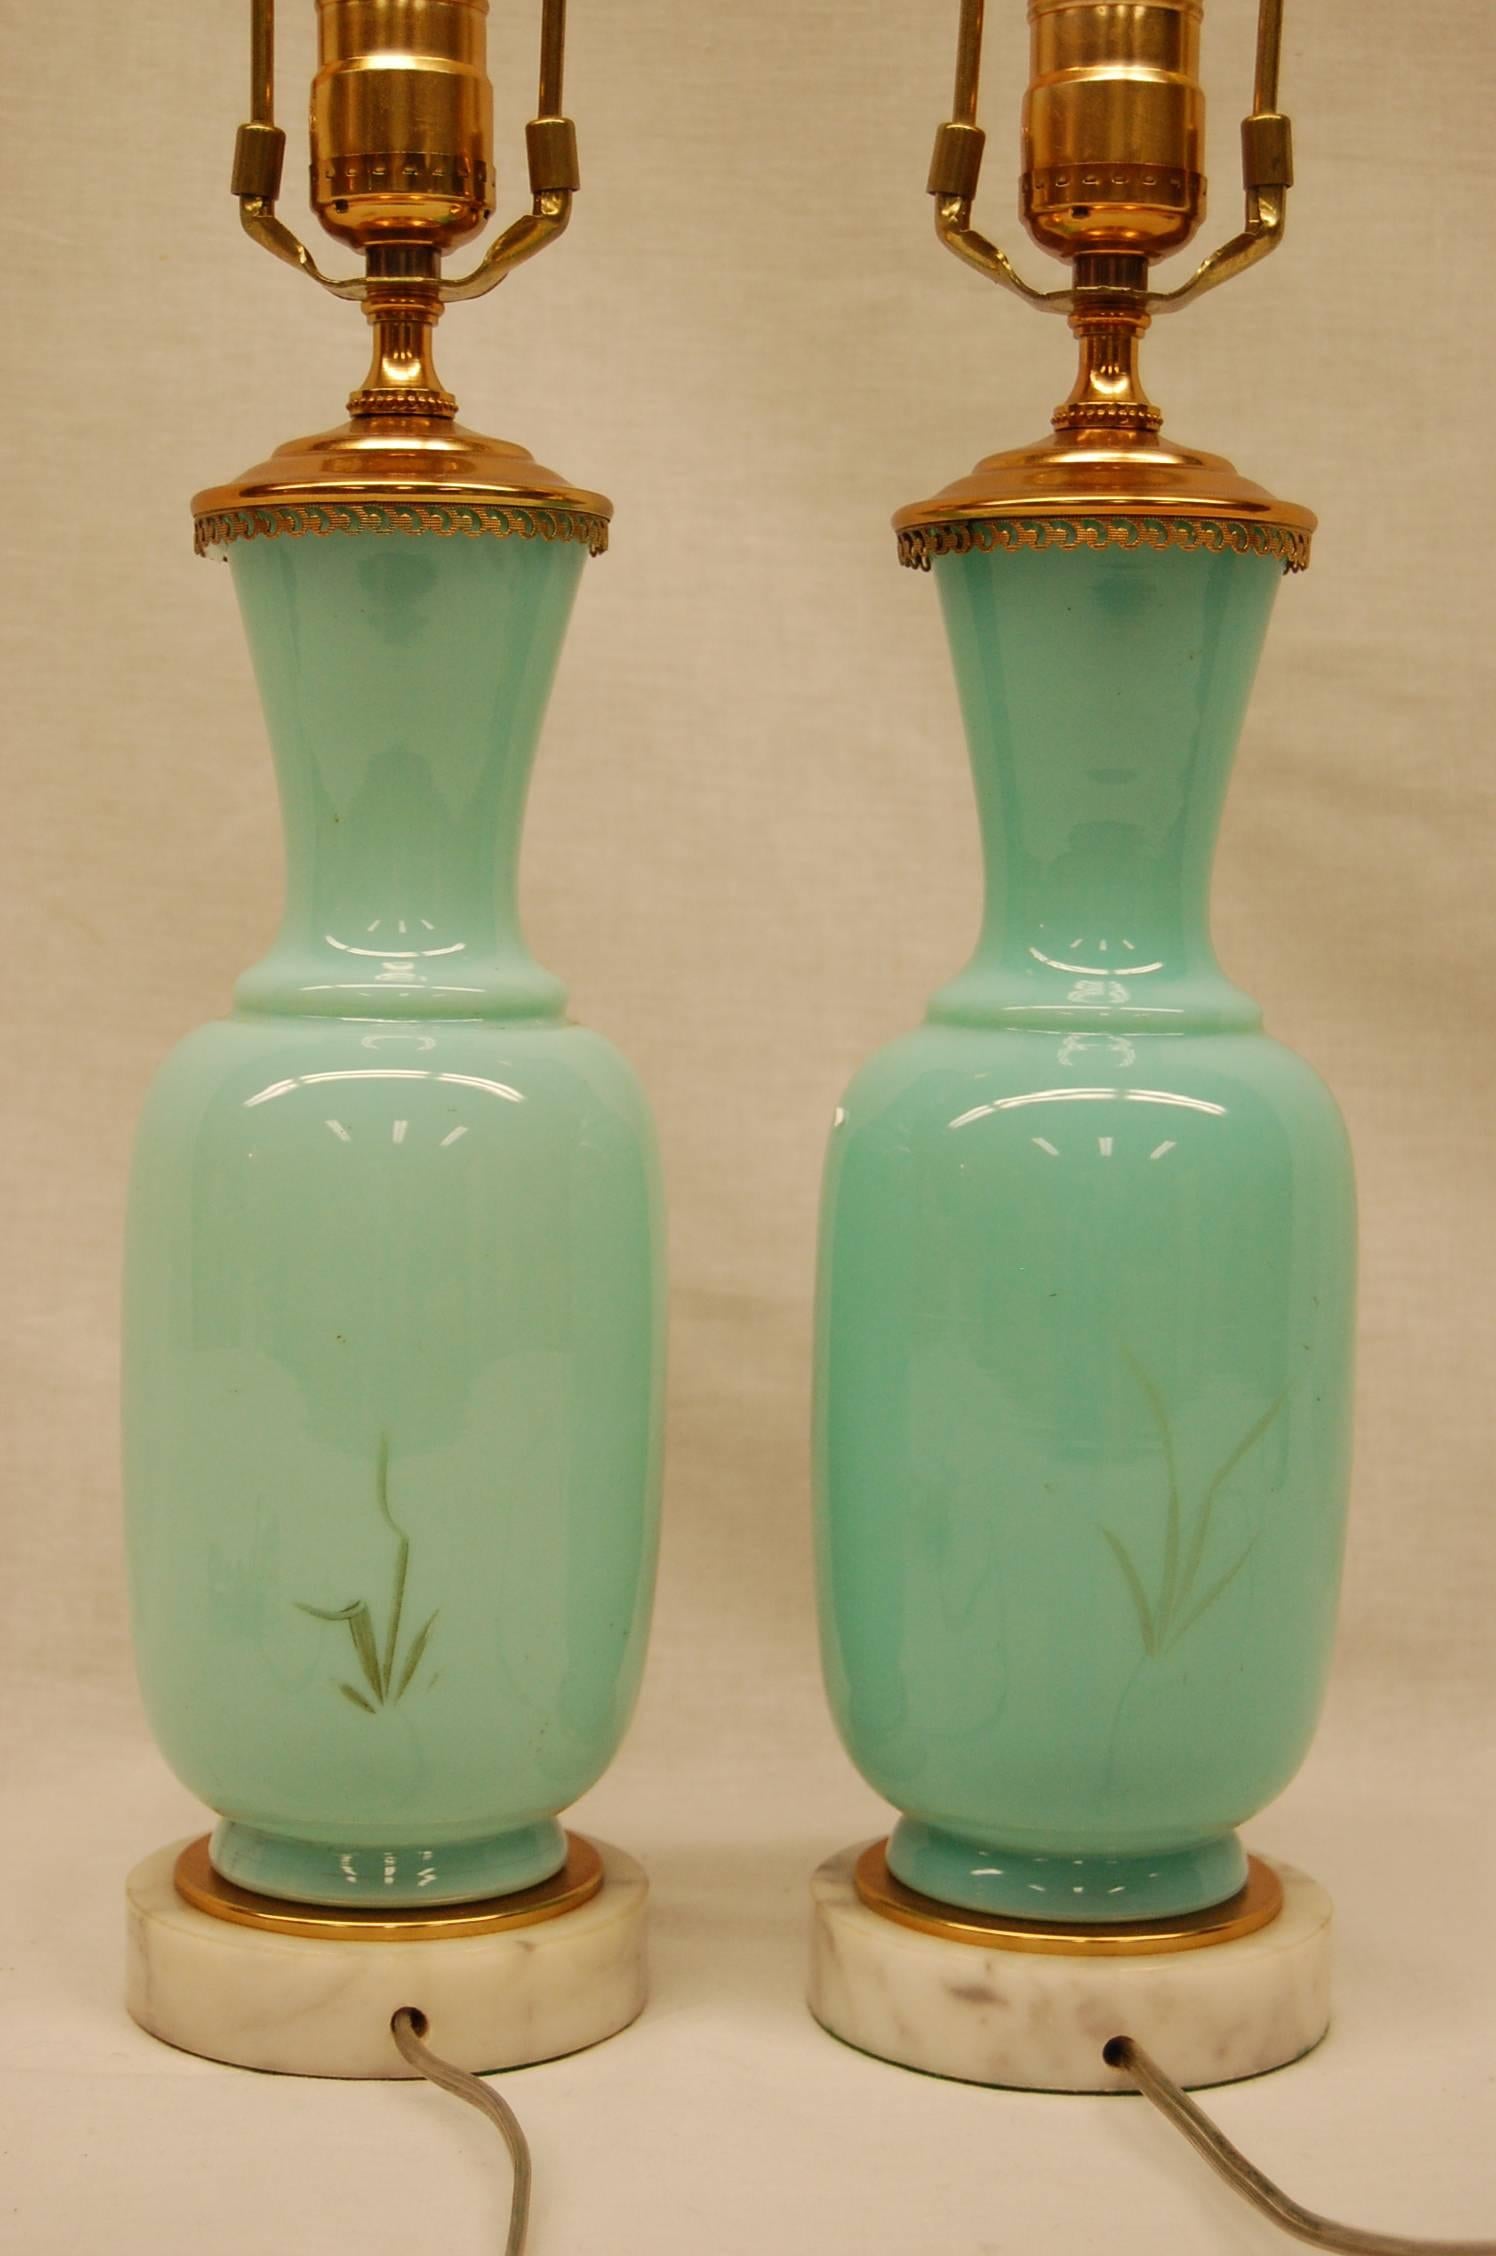 Unknown 19th Century, English Opaline Hand-Painted Vases Wired as Lamps